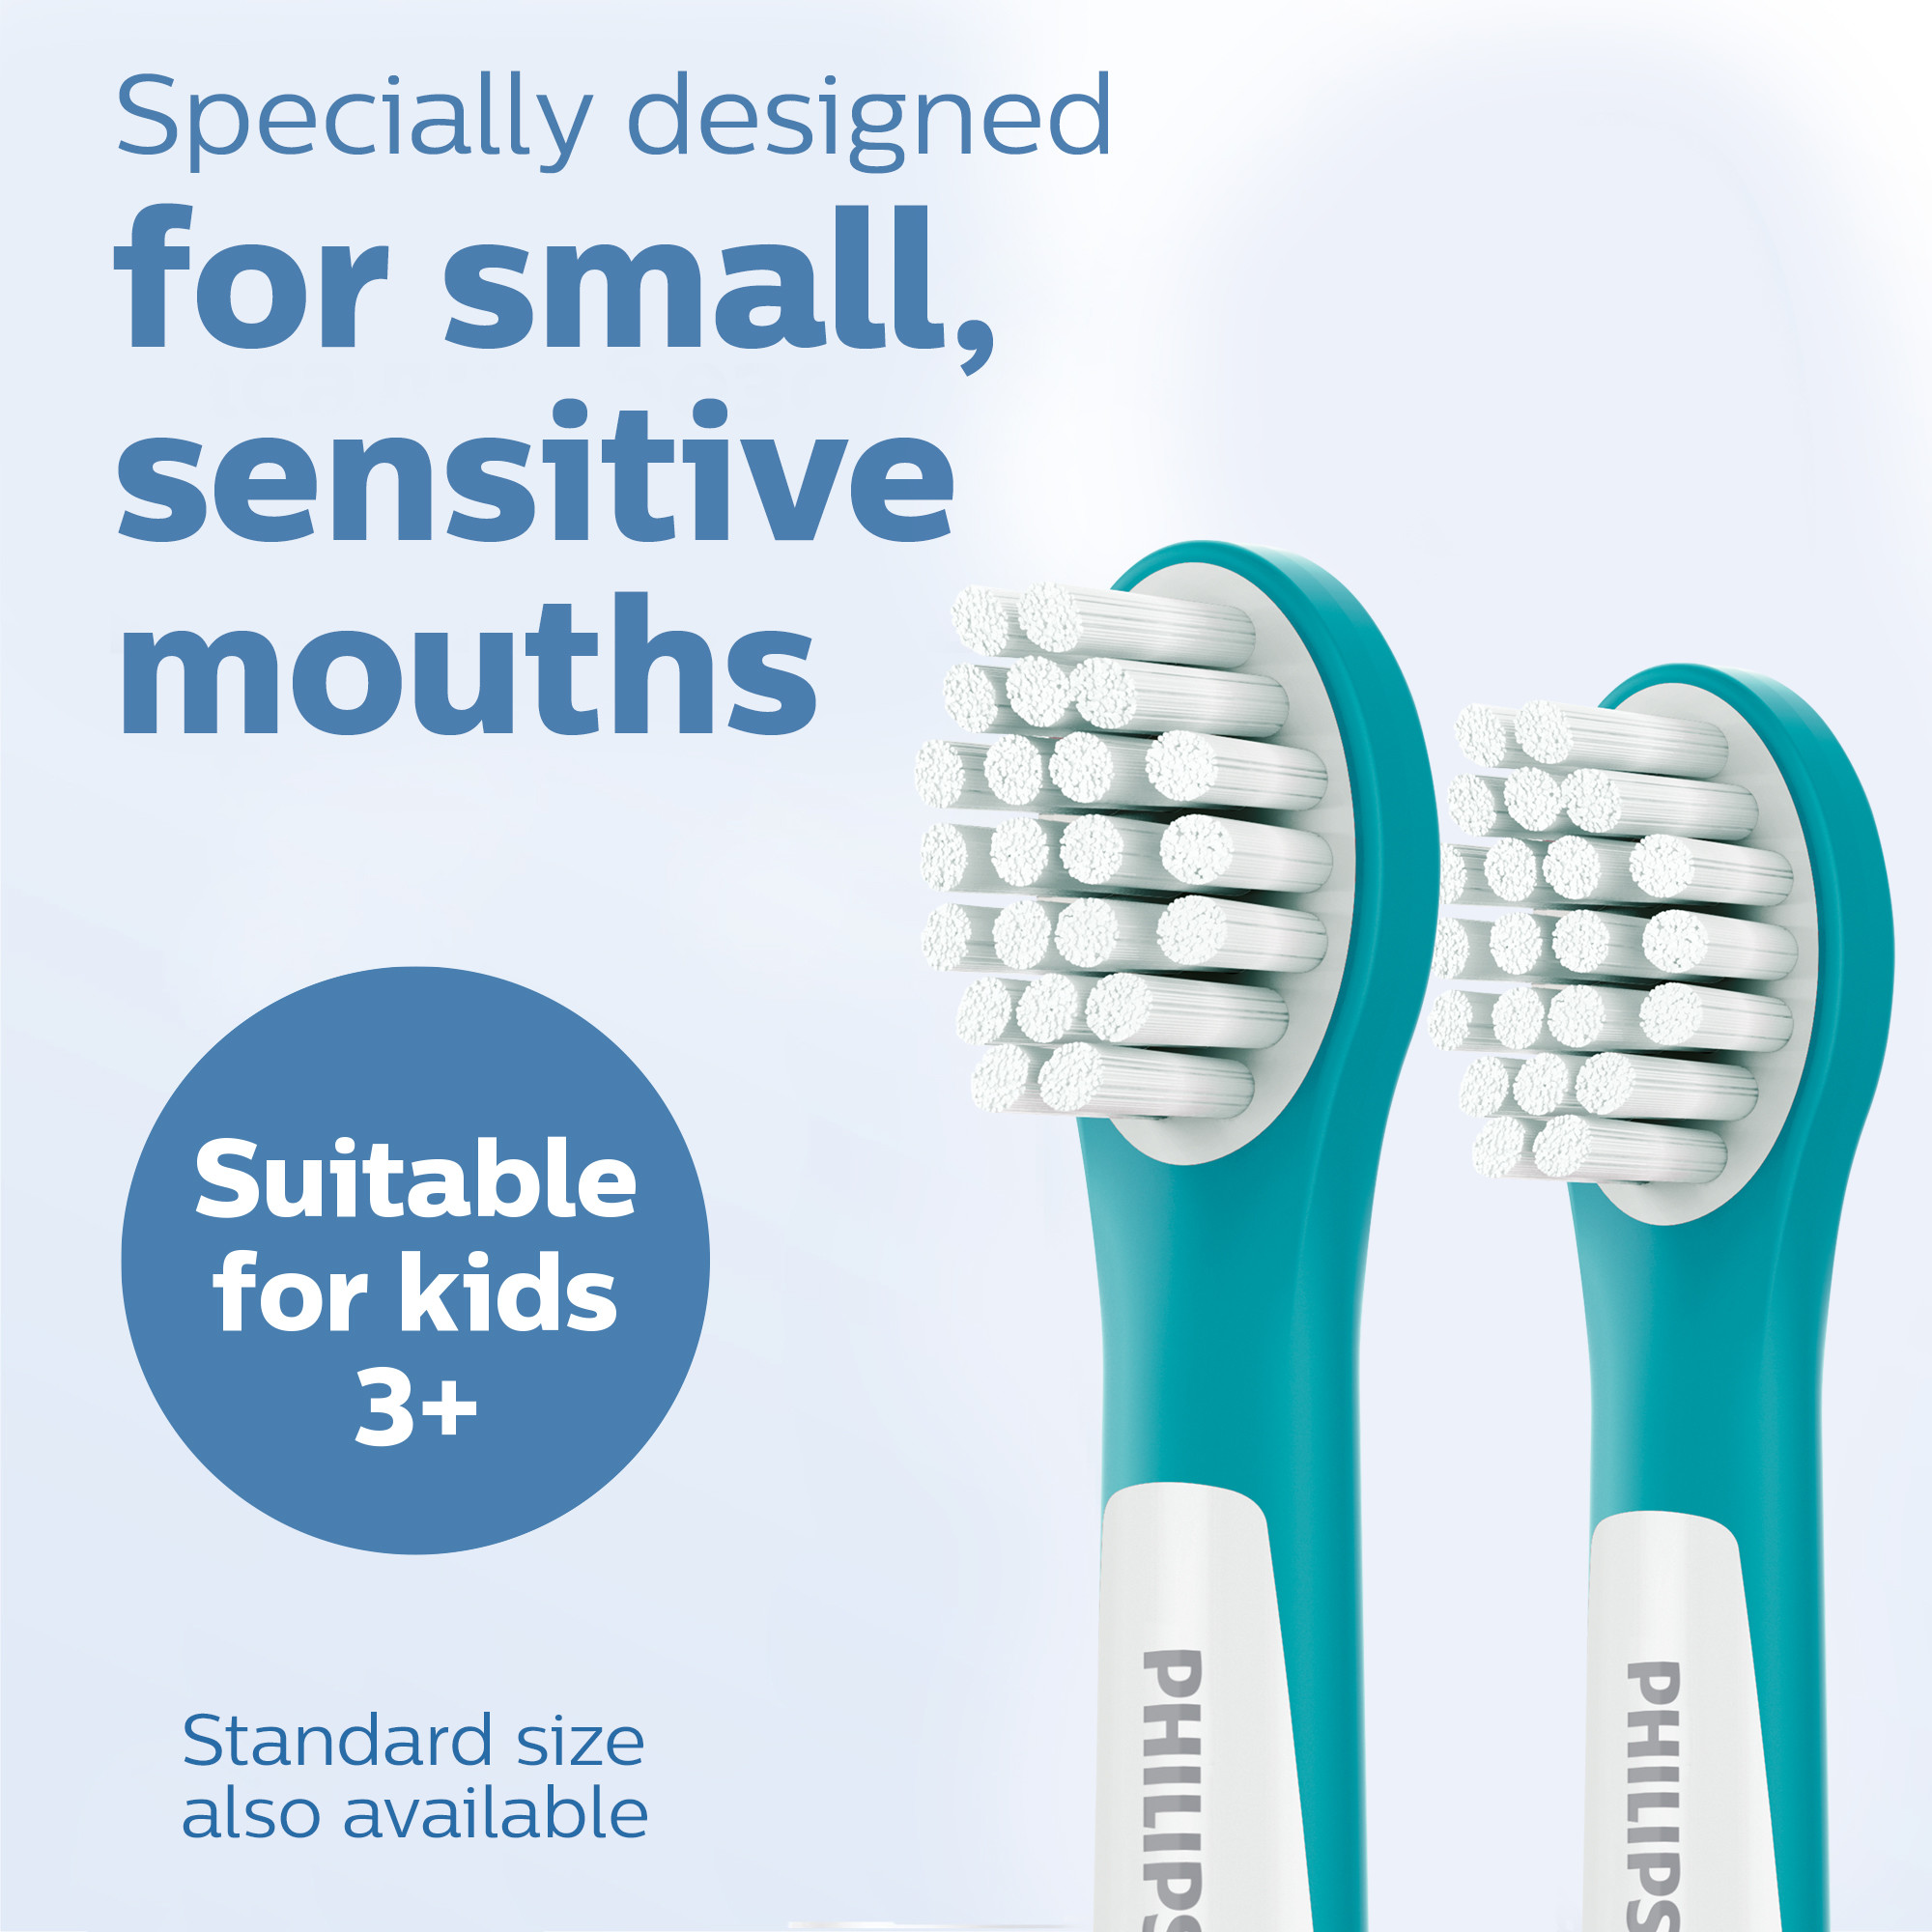 Philips Sonicare For Kids Replacement Toothbrush Heads, HX6032/94, 2-pk Compact - image 5 of 11